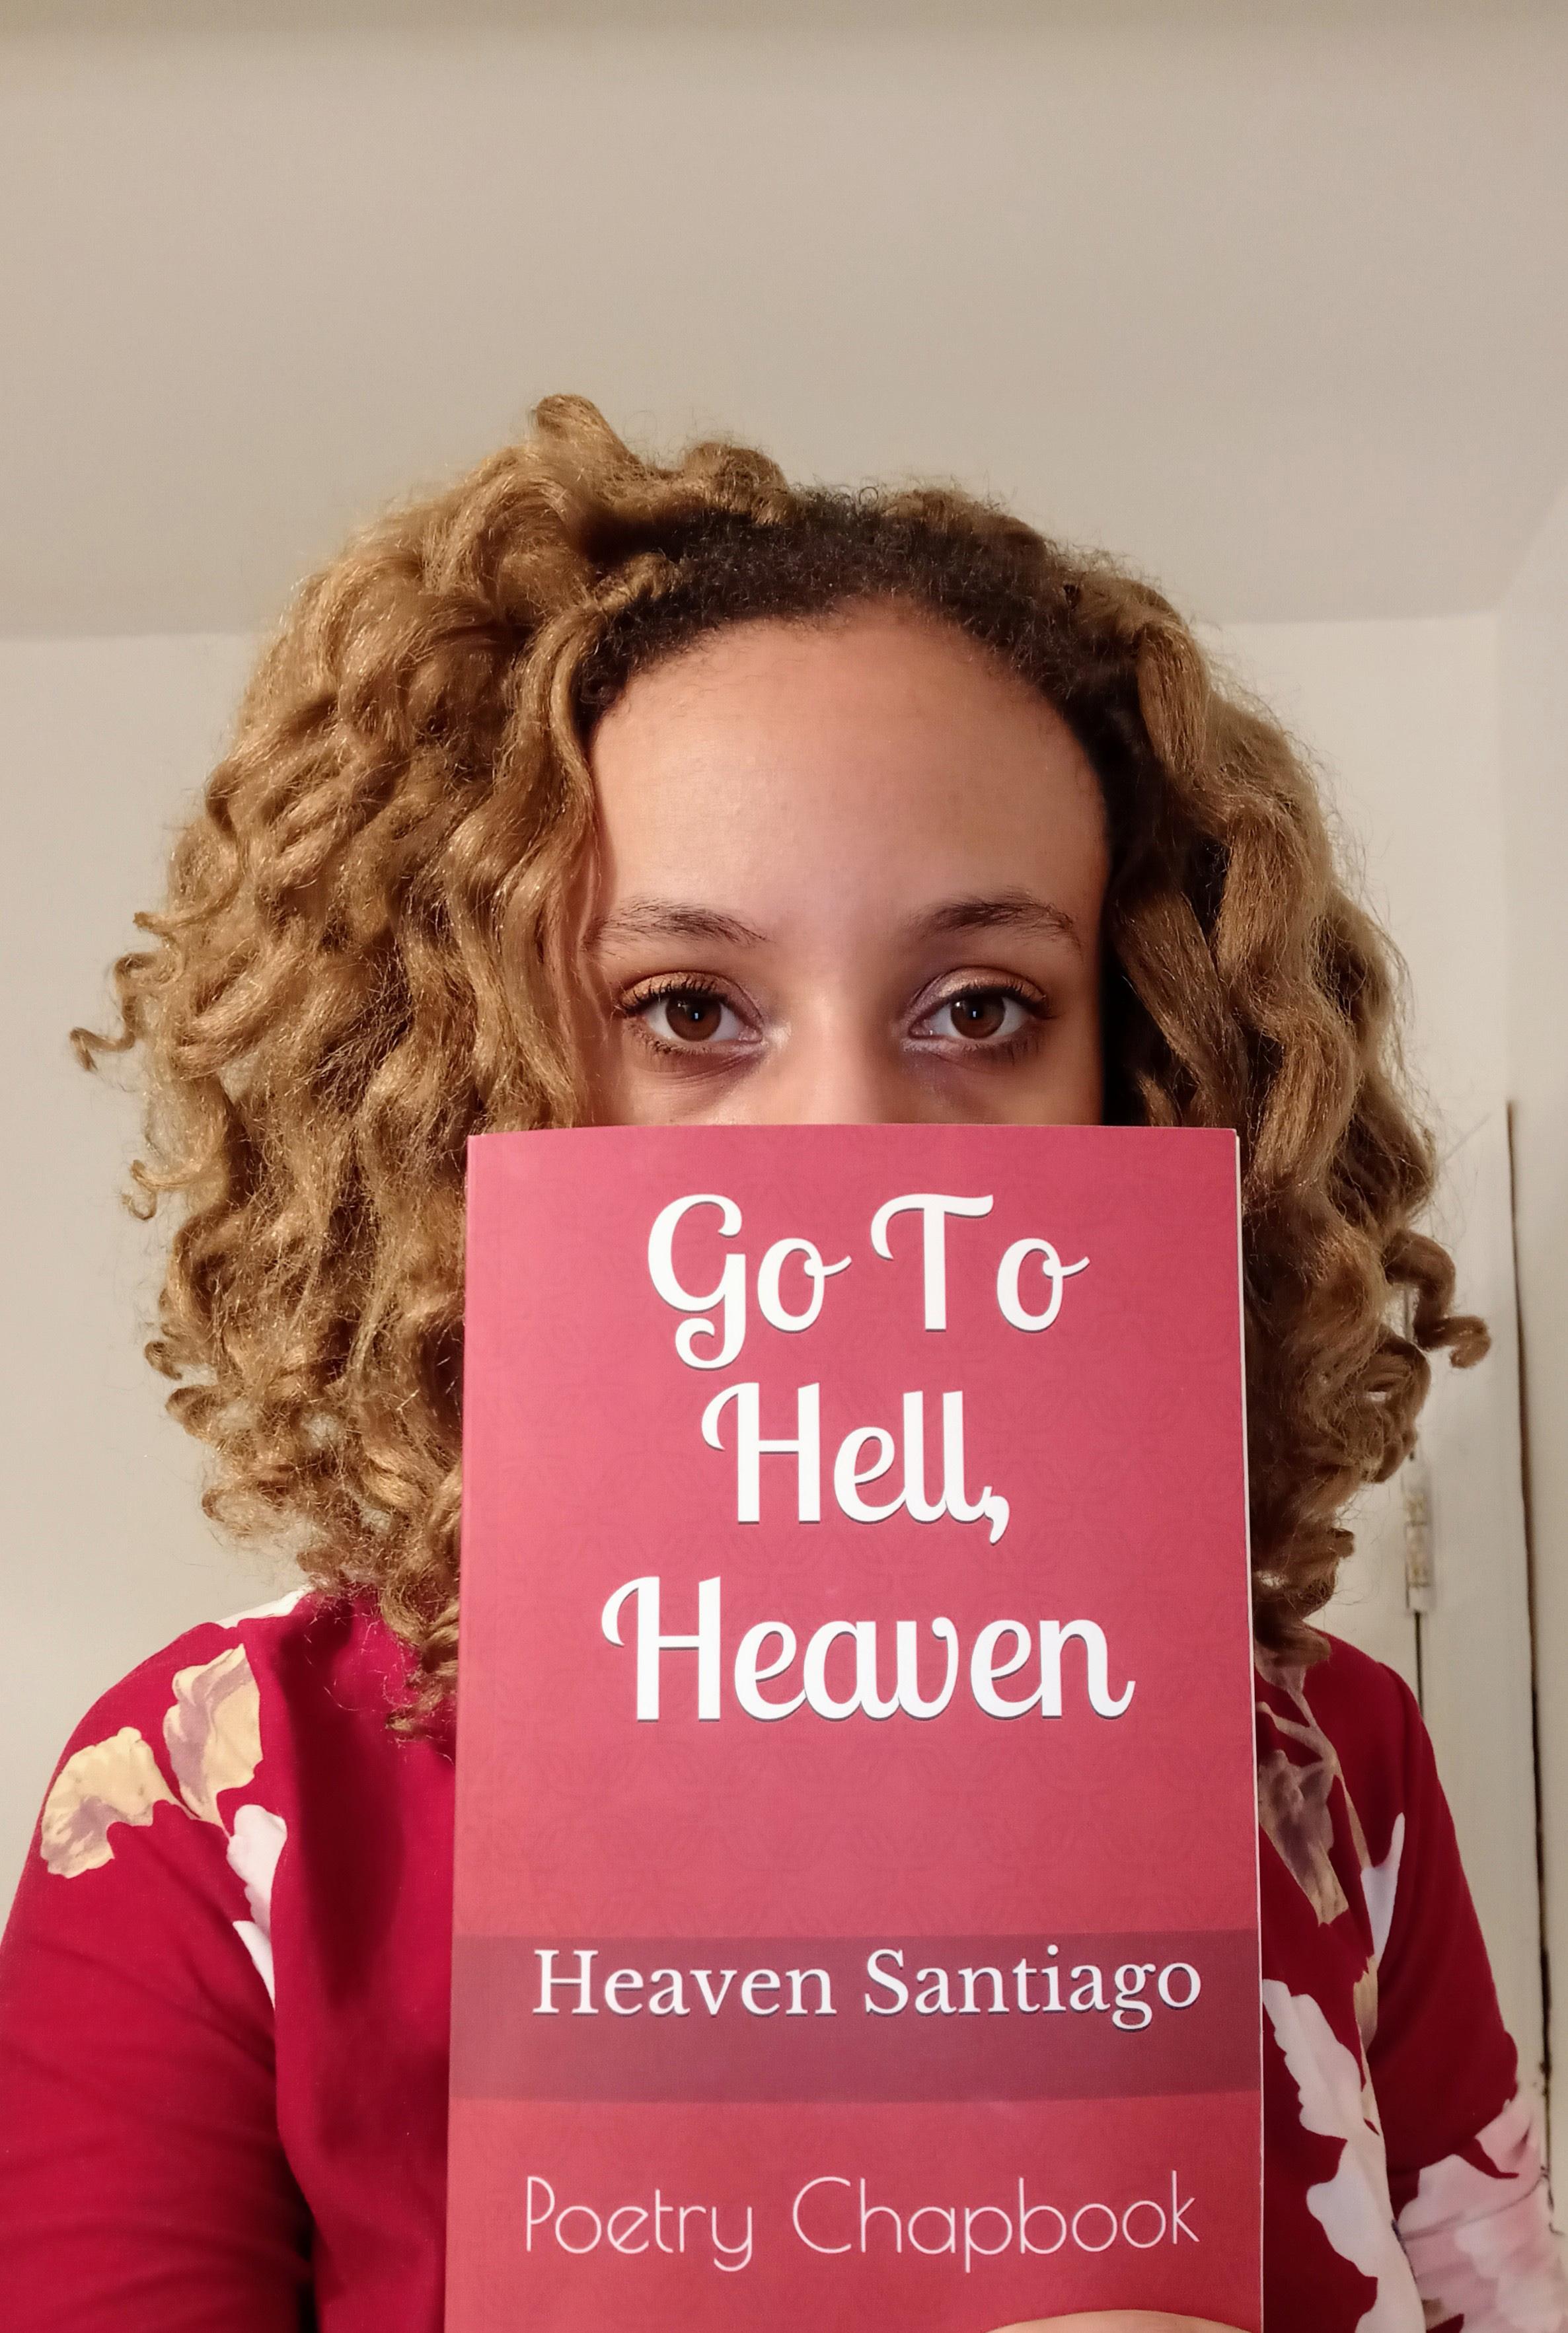 Heaven Santiago with her book of poetry, Go To Hell, Heaven